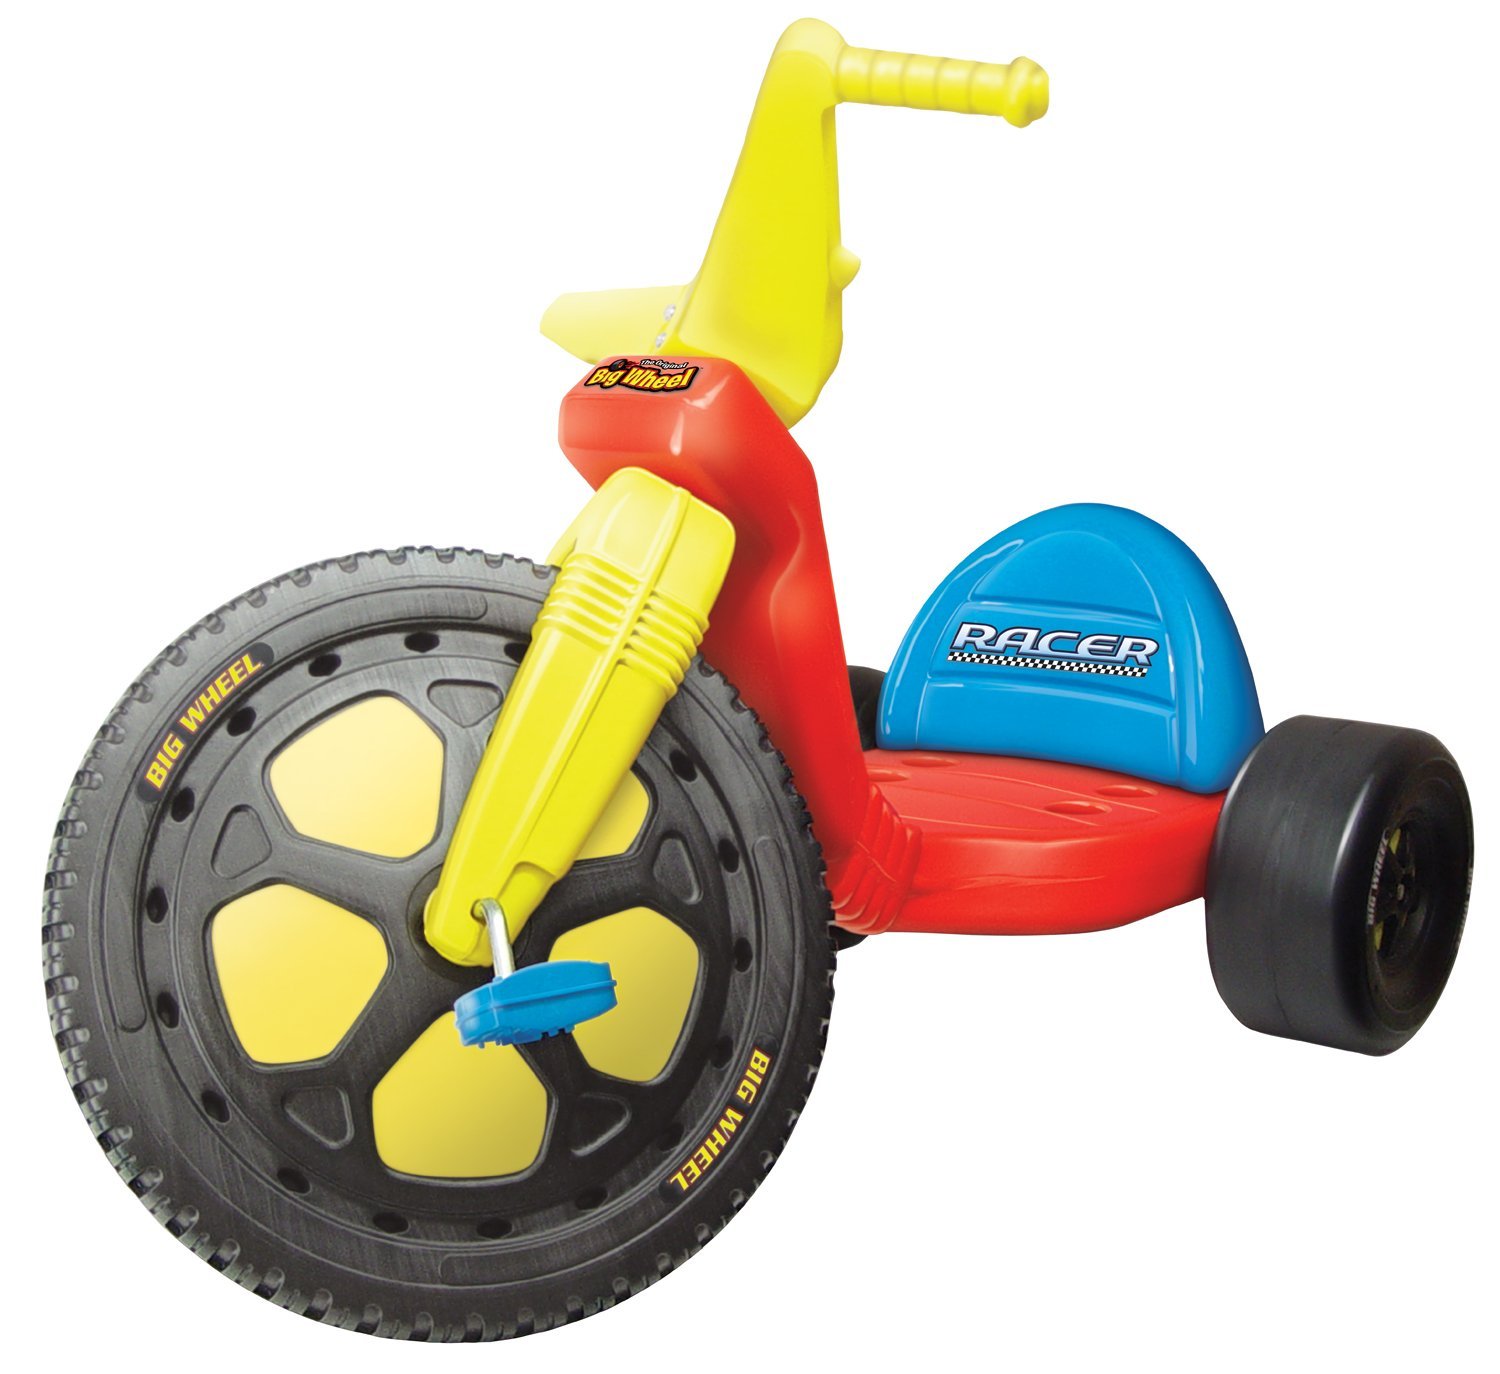 Big Wheel Tricycle (16inch) Red Only $31.99 on Amazon!